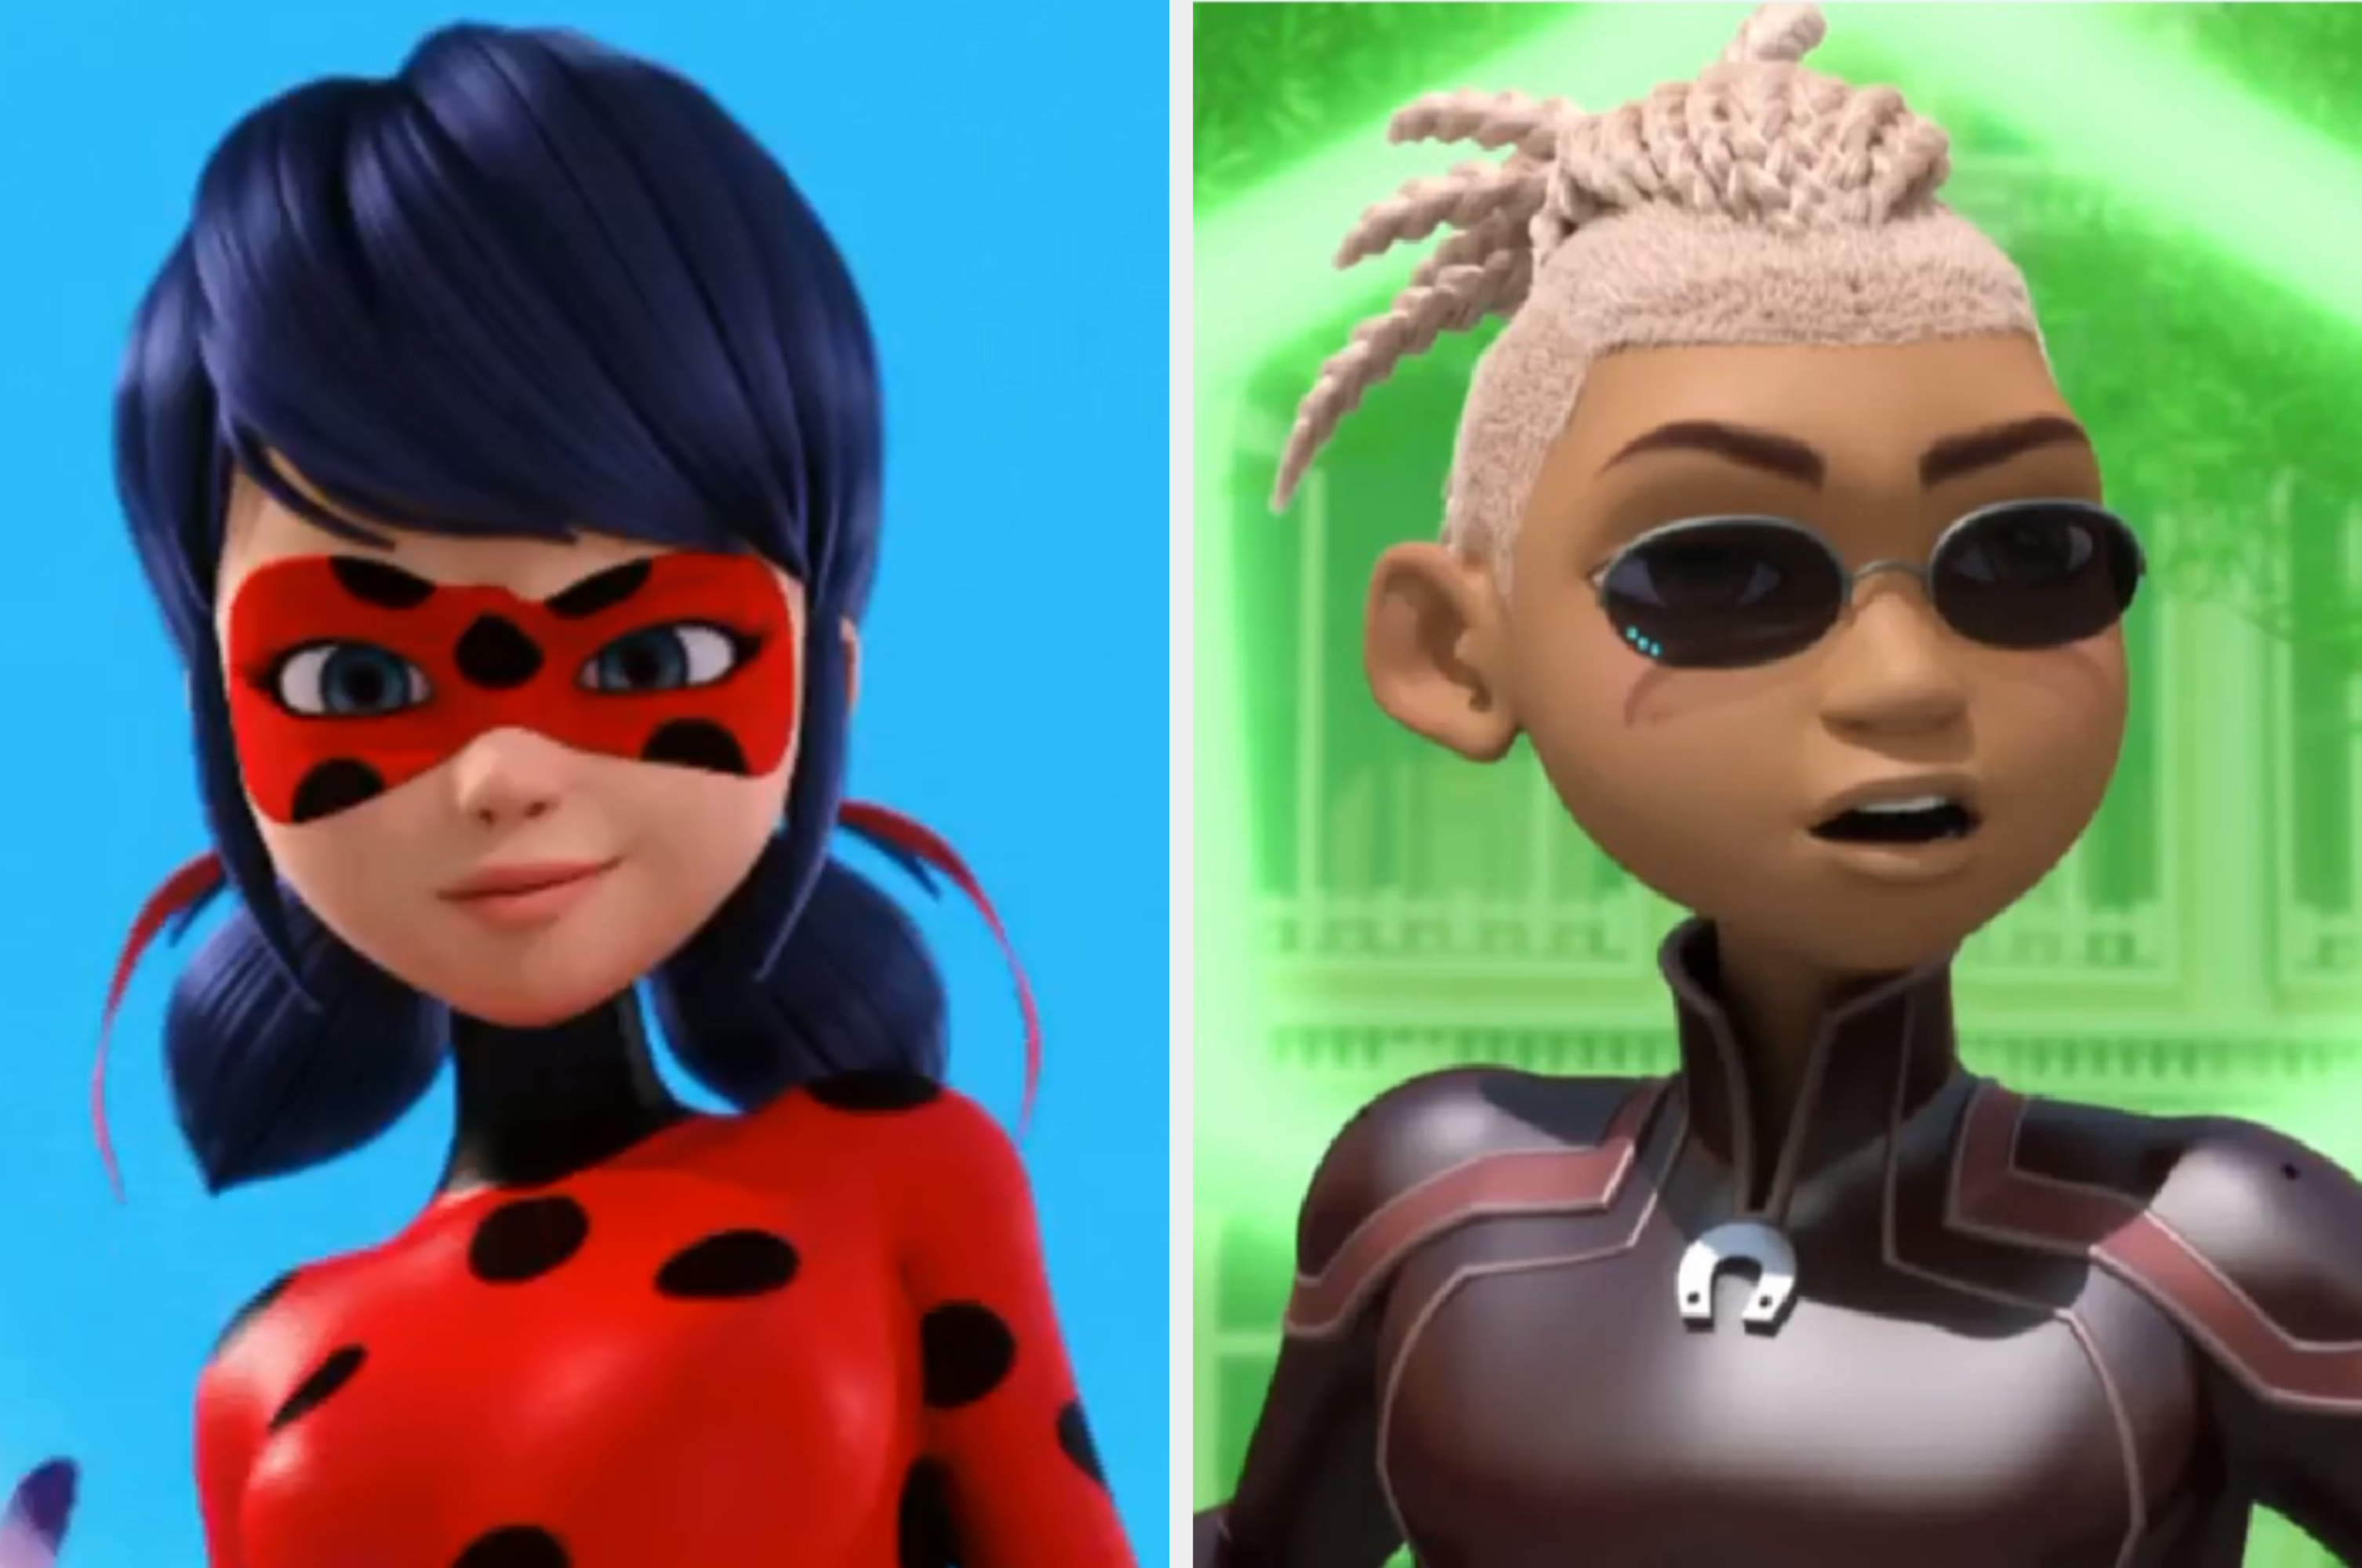 What Kwami From Miraculous Would You Have?